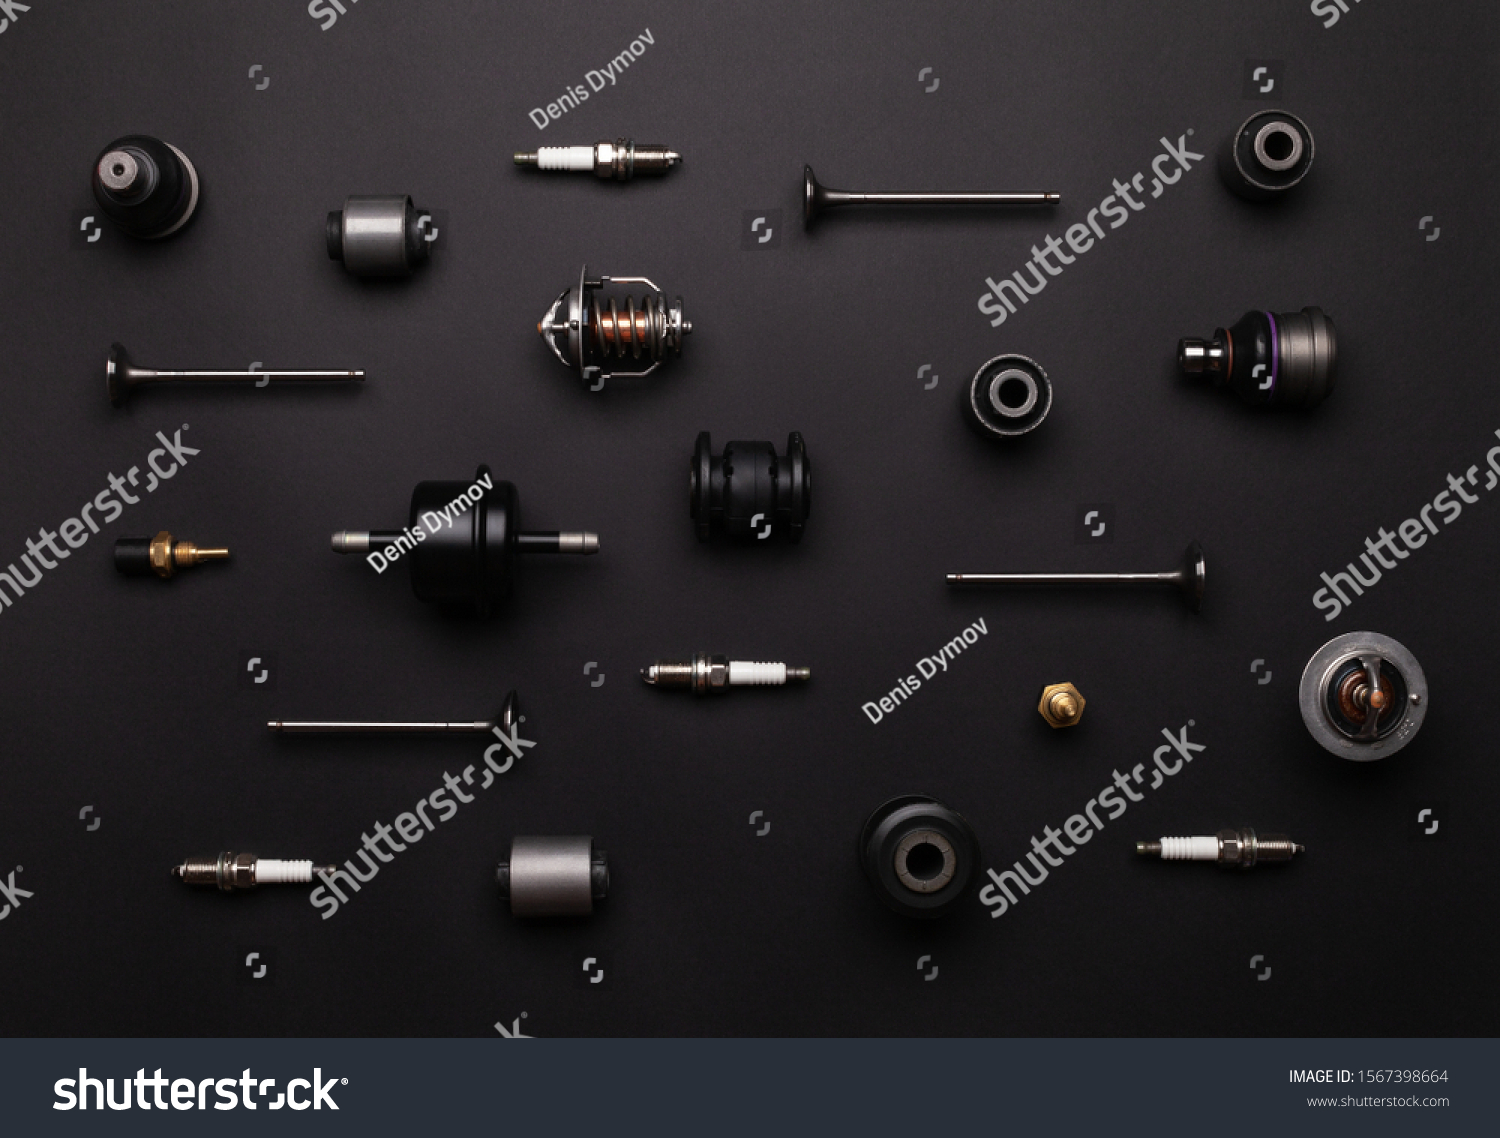 Studio photography - a lot of automotive parts: valves, spark plugs, silent blocks, thermostats, filter, sensors, ball bearings, lie in straight rows on a flat surface isolated on a black background. #1567398664